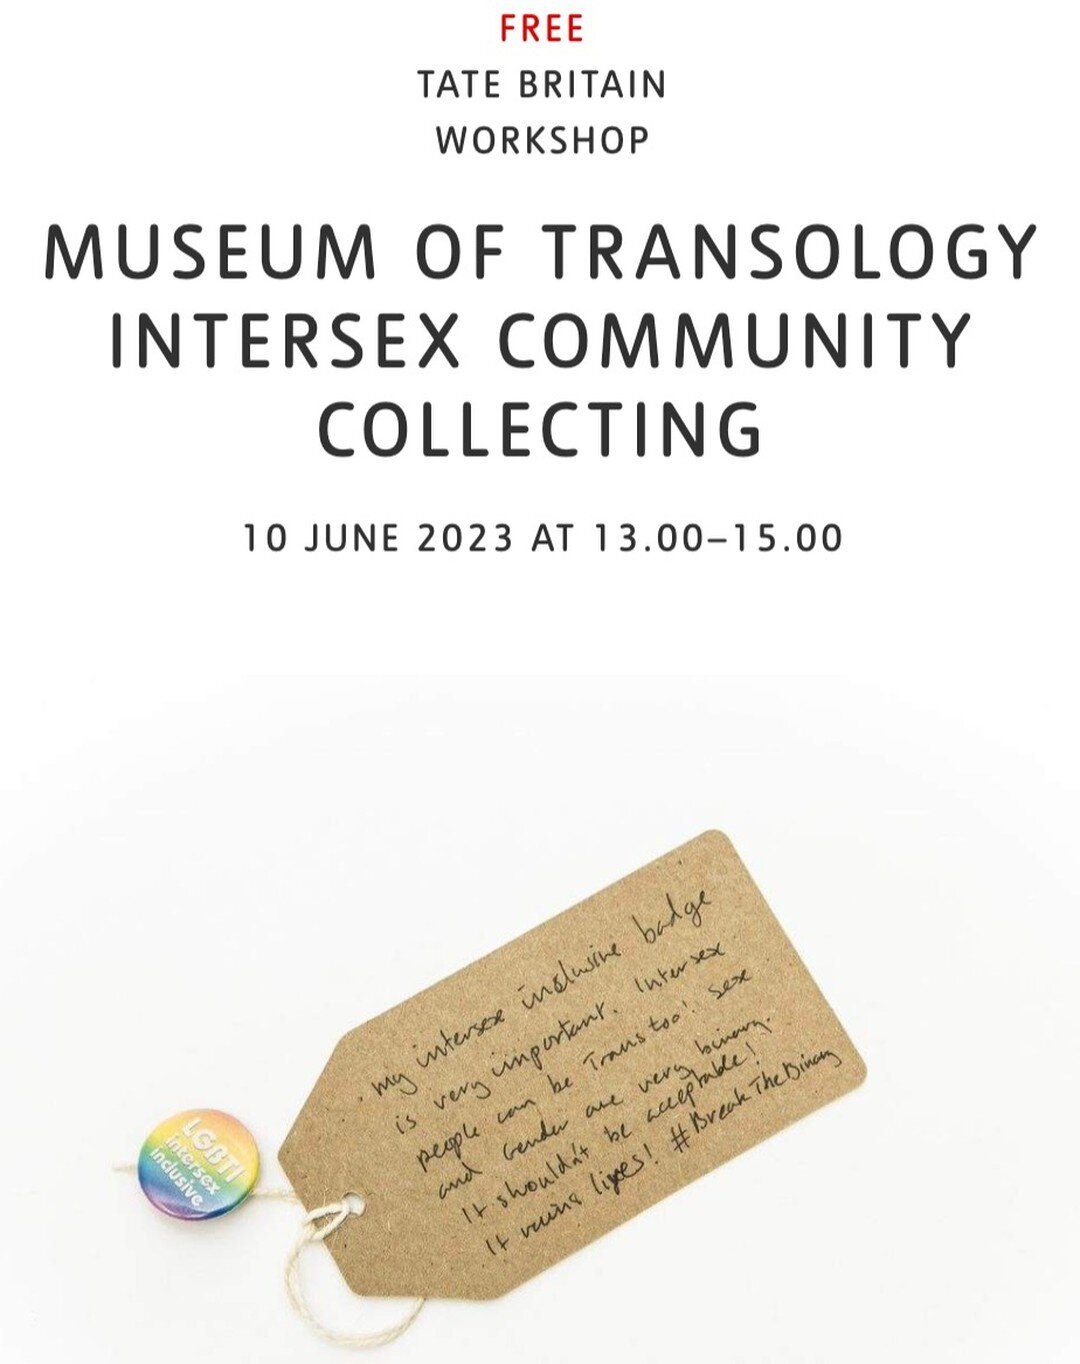 Raising intersex visibility is central to the fight for body autonomy and human rights for all people.

Sex and gender are BOTH a spectrum.

There are already objects in the MoT's collection that have been donated by people who want to share their ex